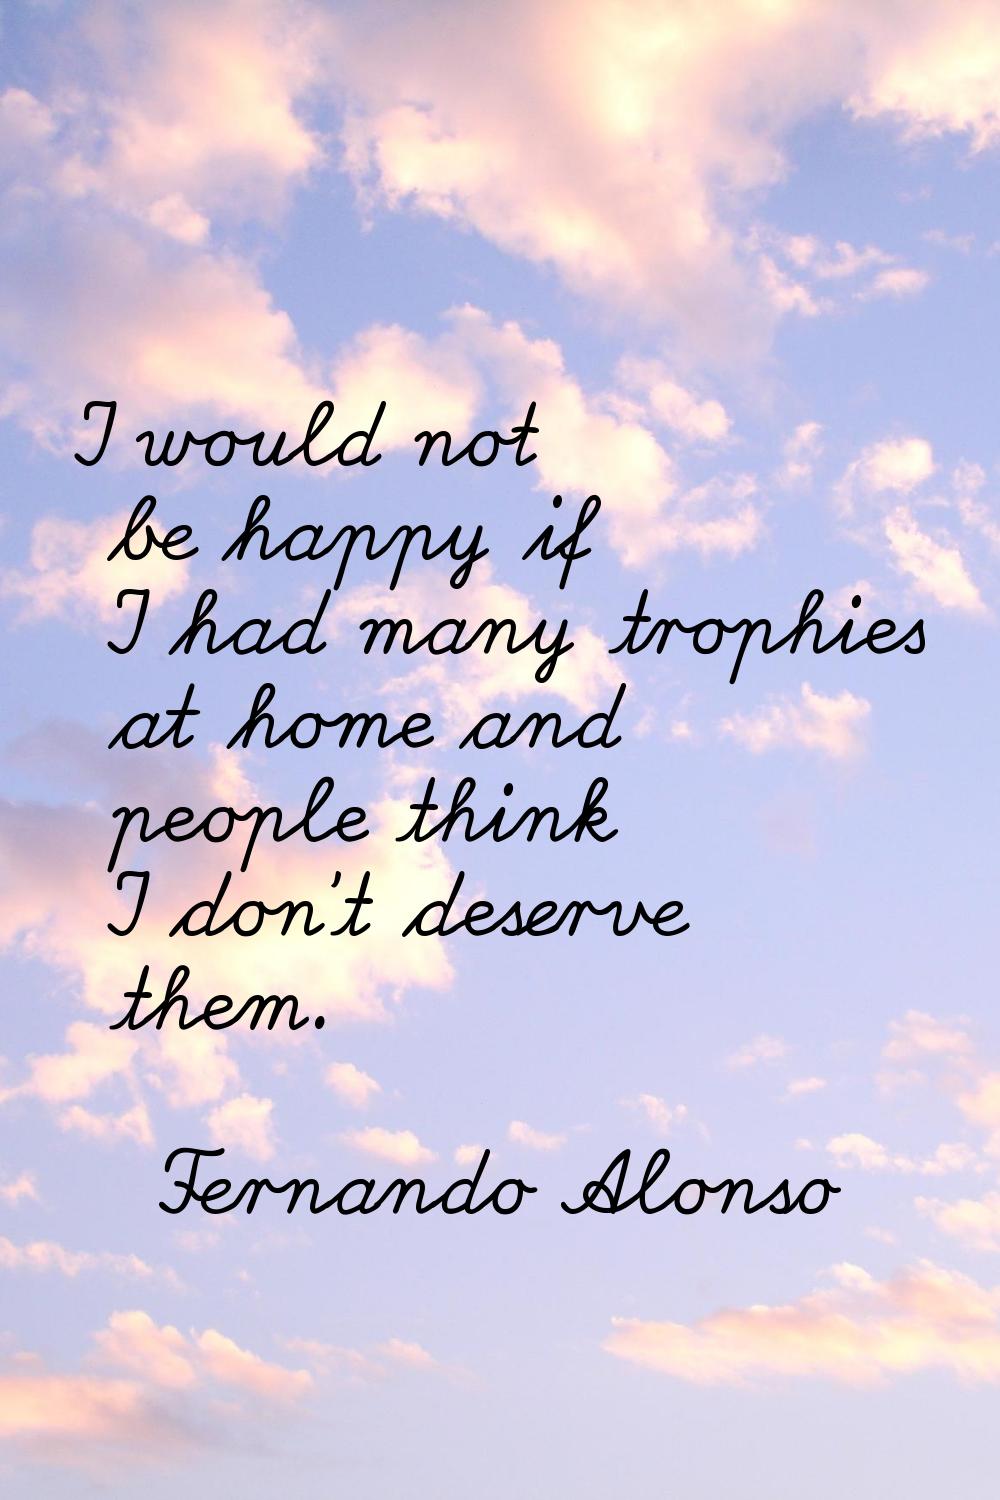 I would not be happy if I had many trophies at home and people think I don't deserve them.